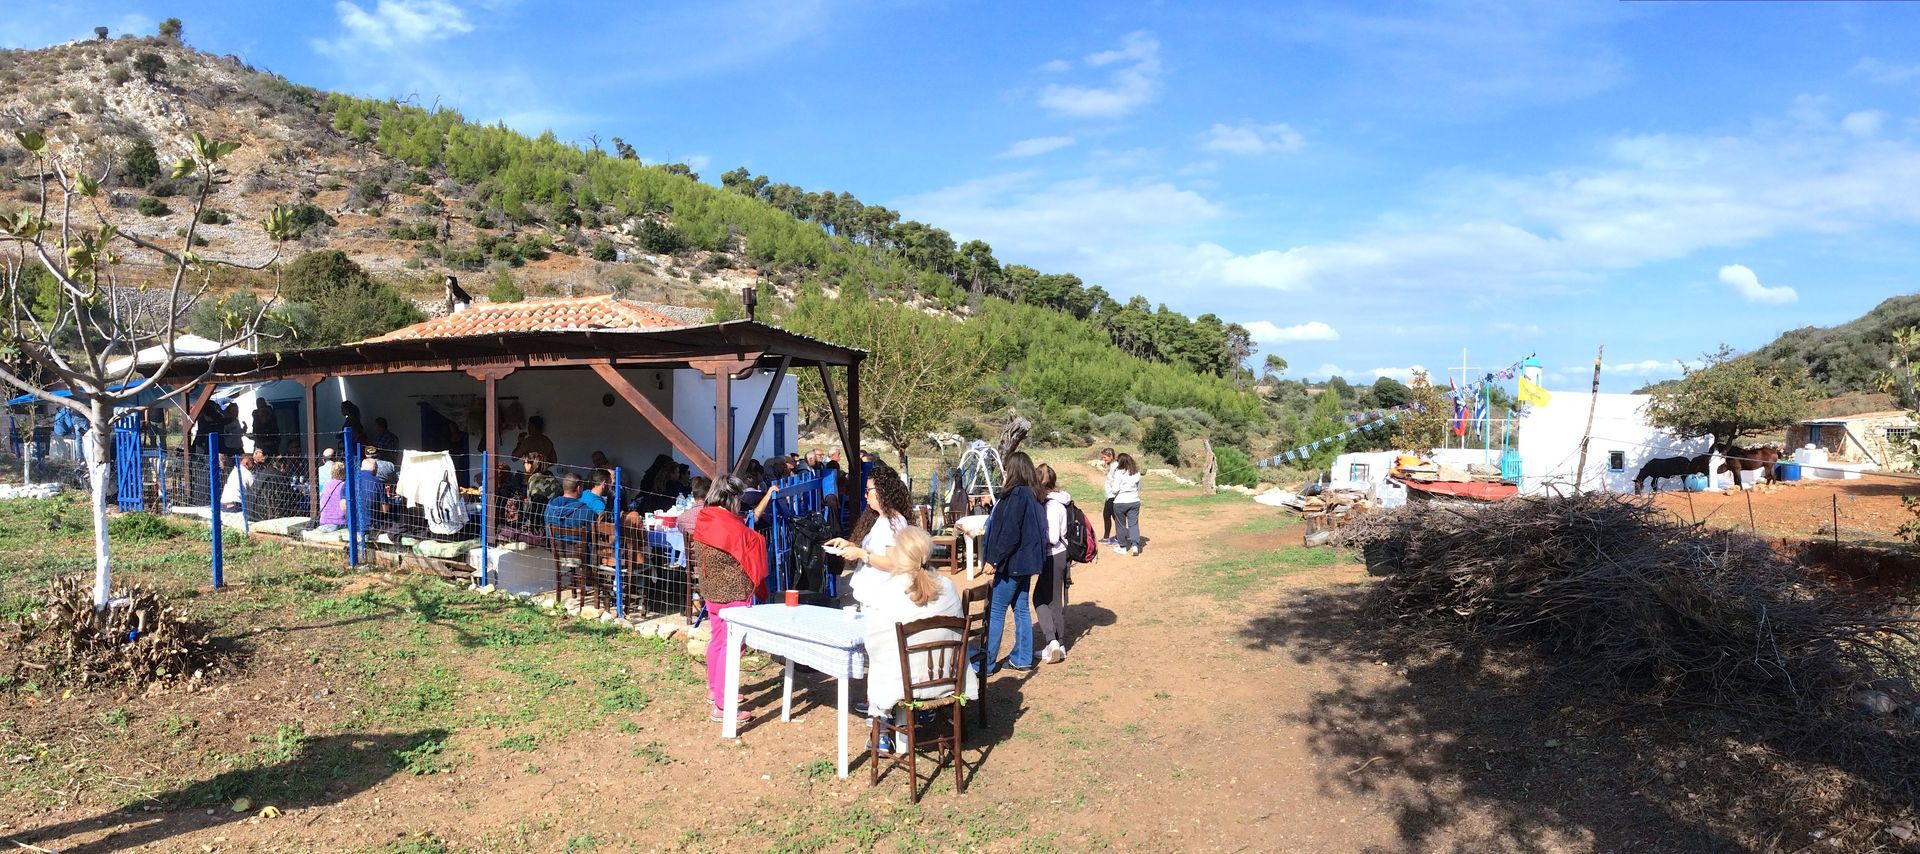 Lunch after Sunday Mass in Pevges on Hydra Island, Greece, at Saint Nicolaos Chapel, 10th October 2018.